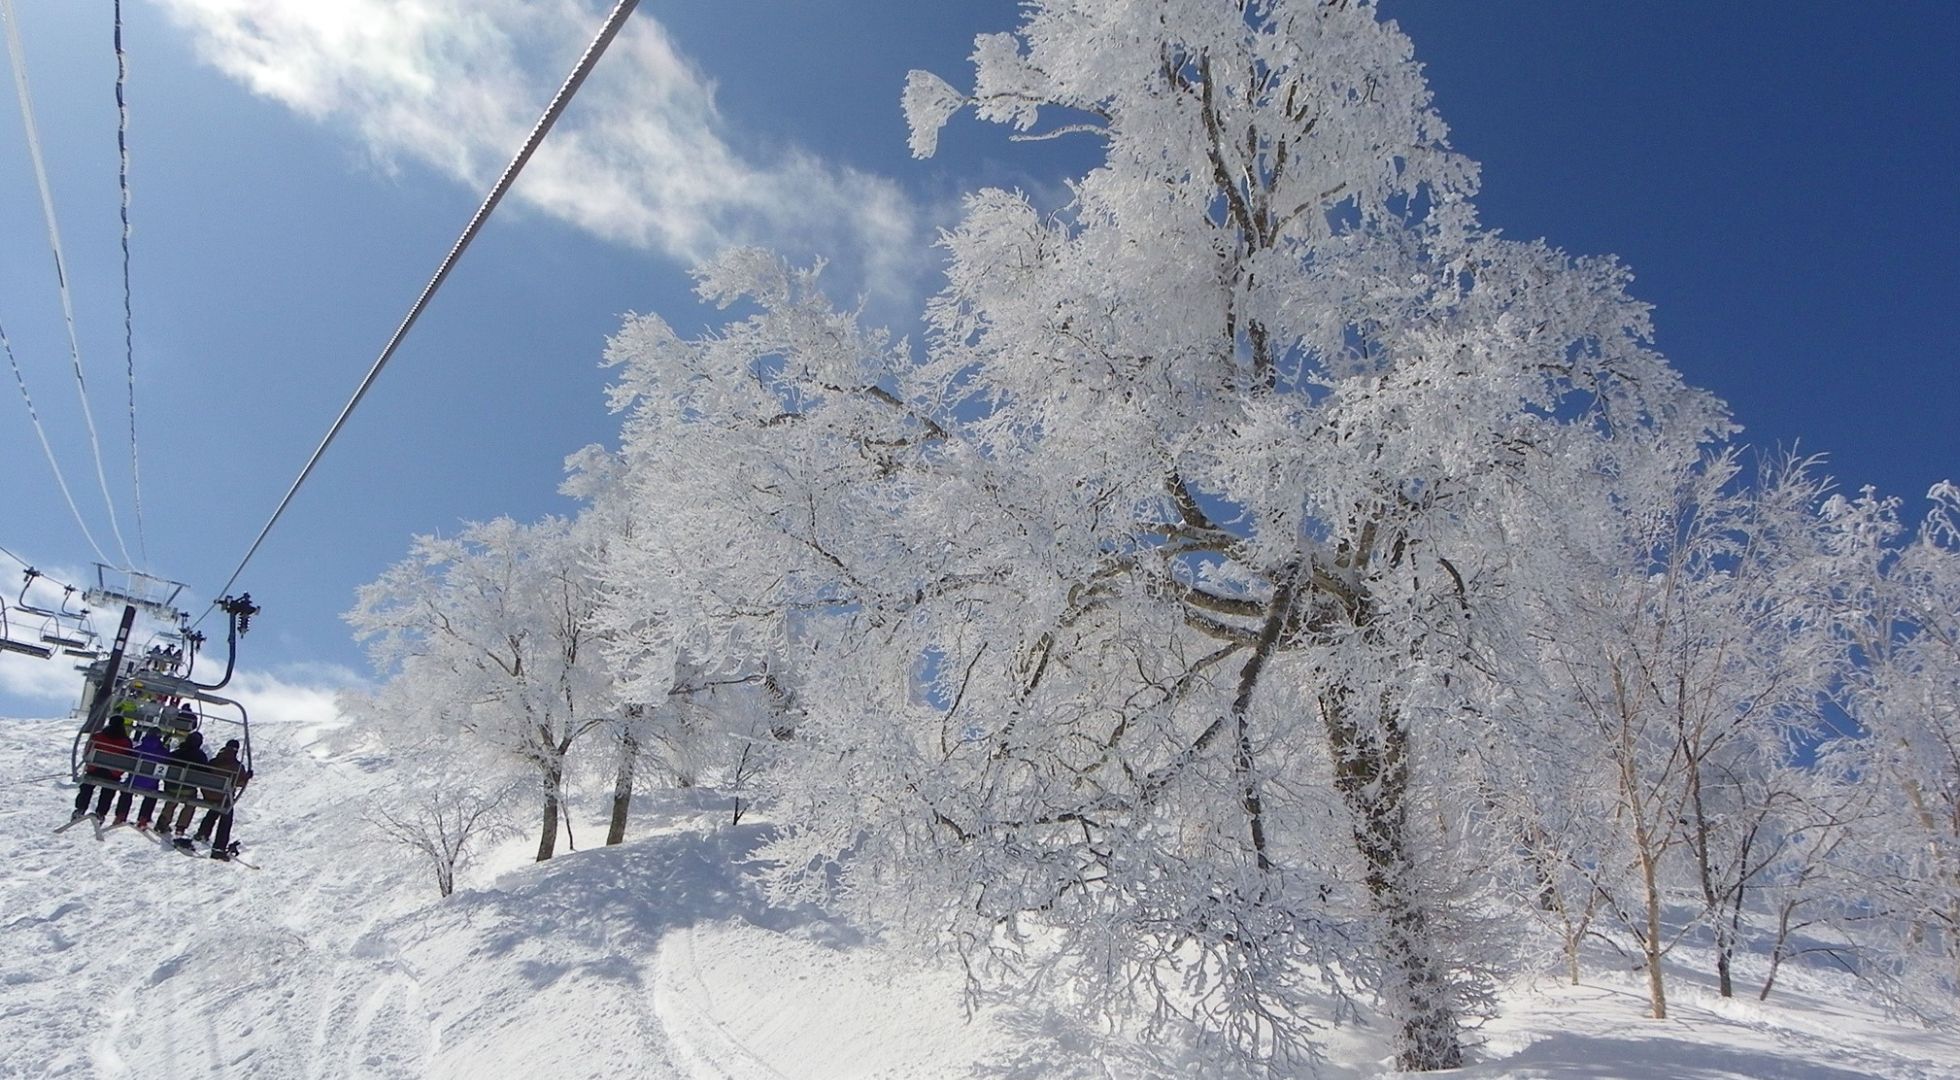 Japan ski resorts receive visitors from around the world every year